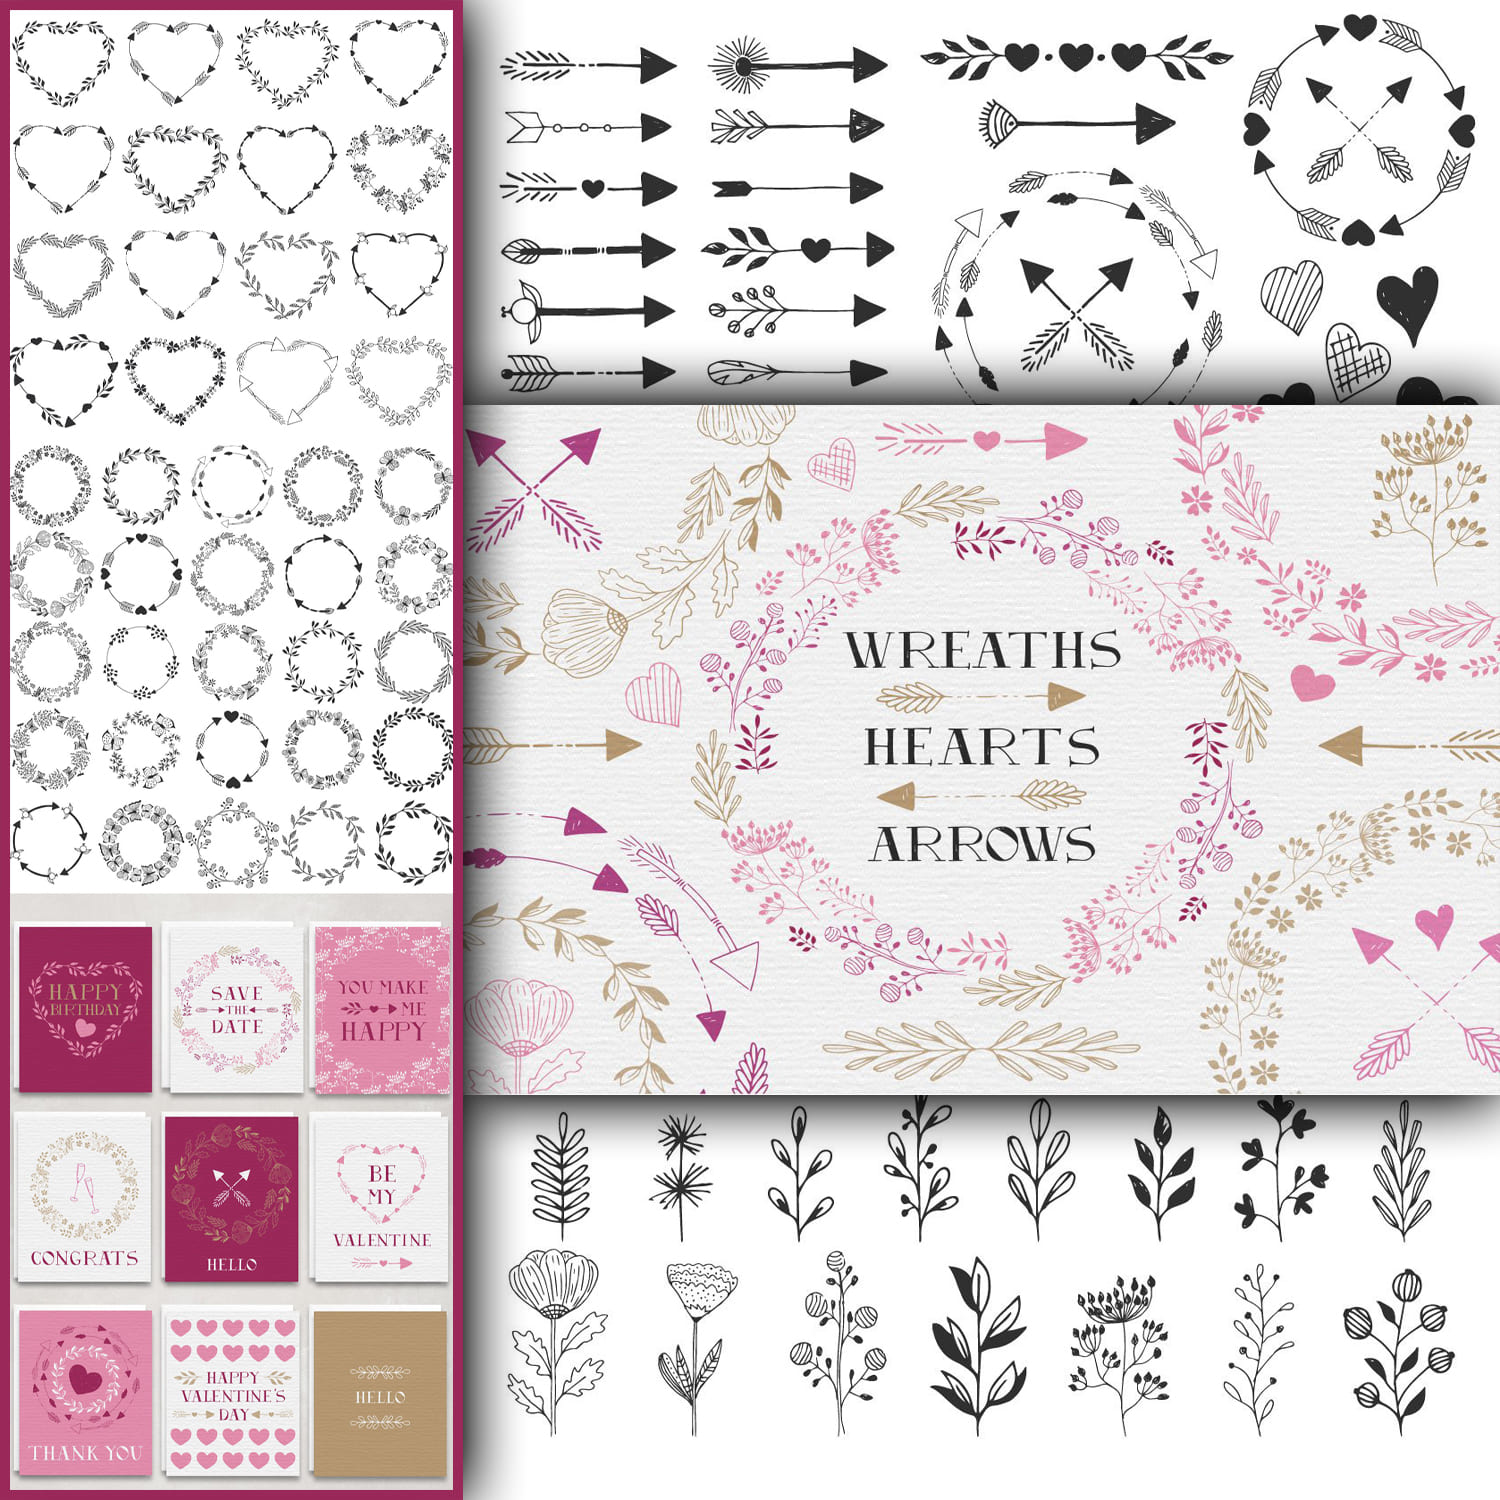 Wreaths, Hearts, Arrows - main image preview.